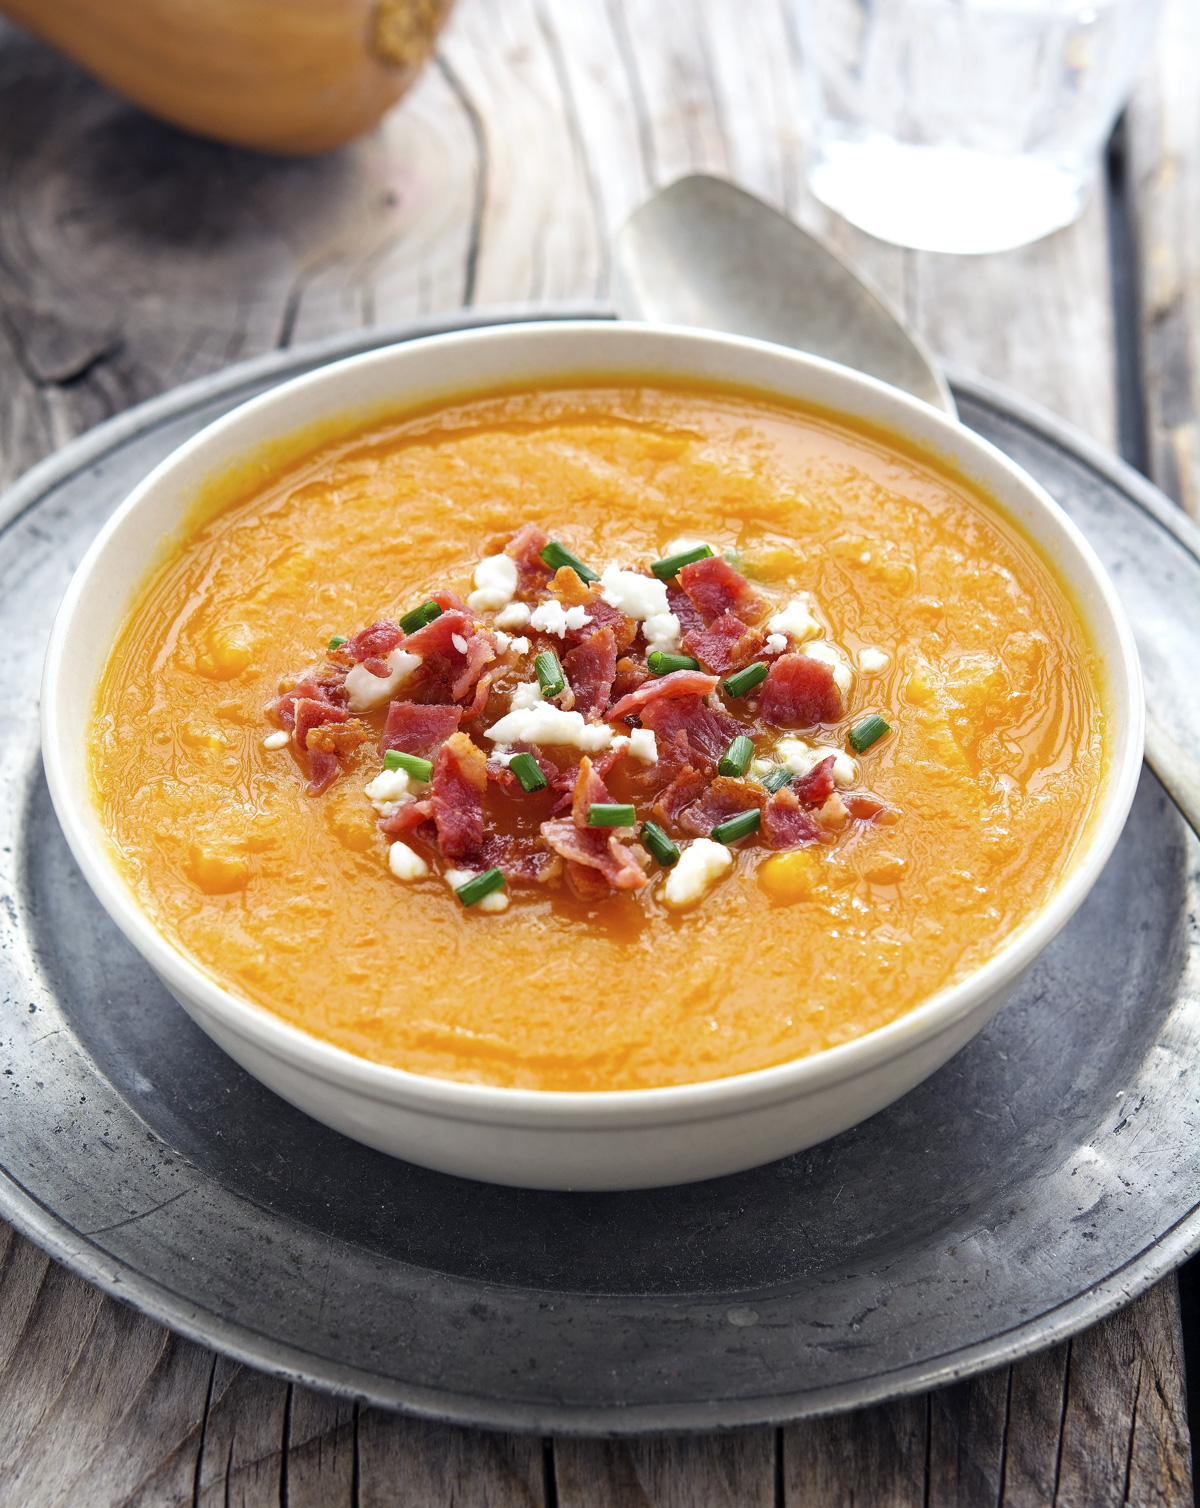 The Iron You: Roasted Butternut Squash and Bacon Soup